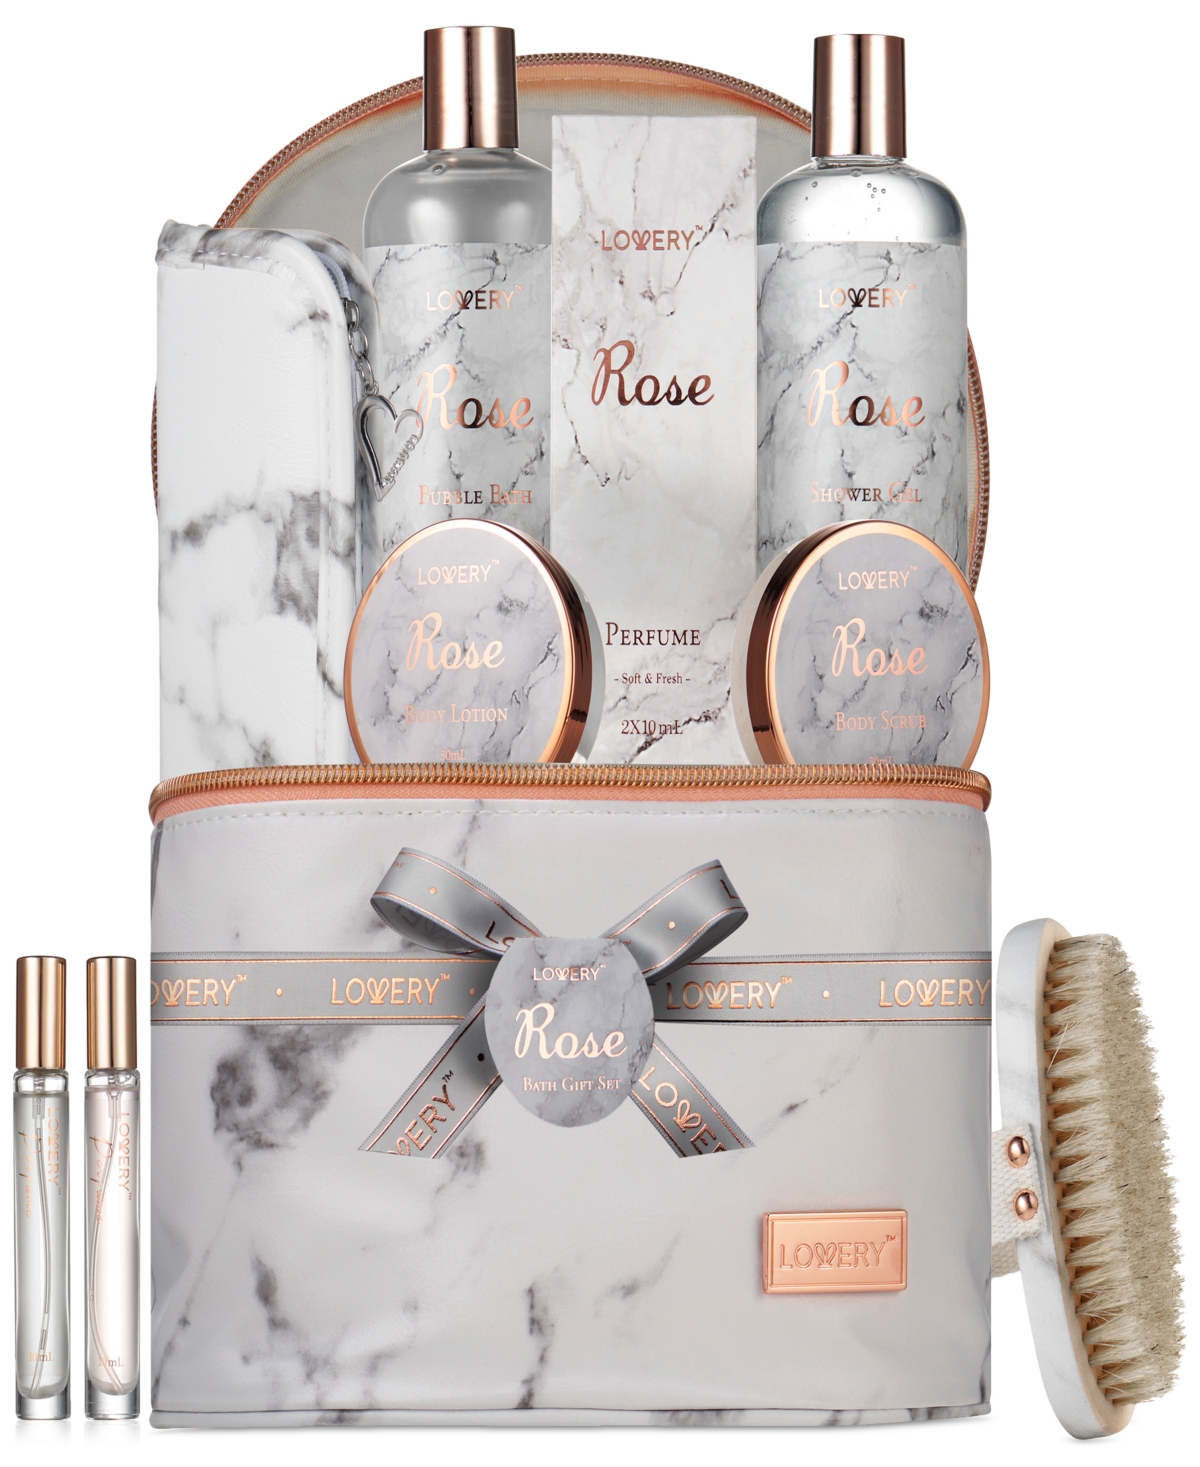 Lovery 15-pc. Rose Home Spa Luxury Body Care Gift Set